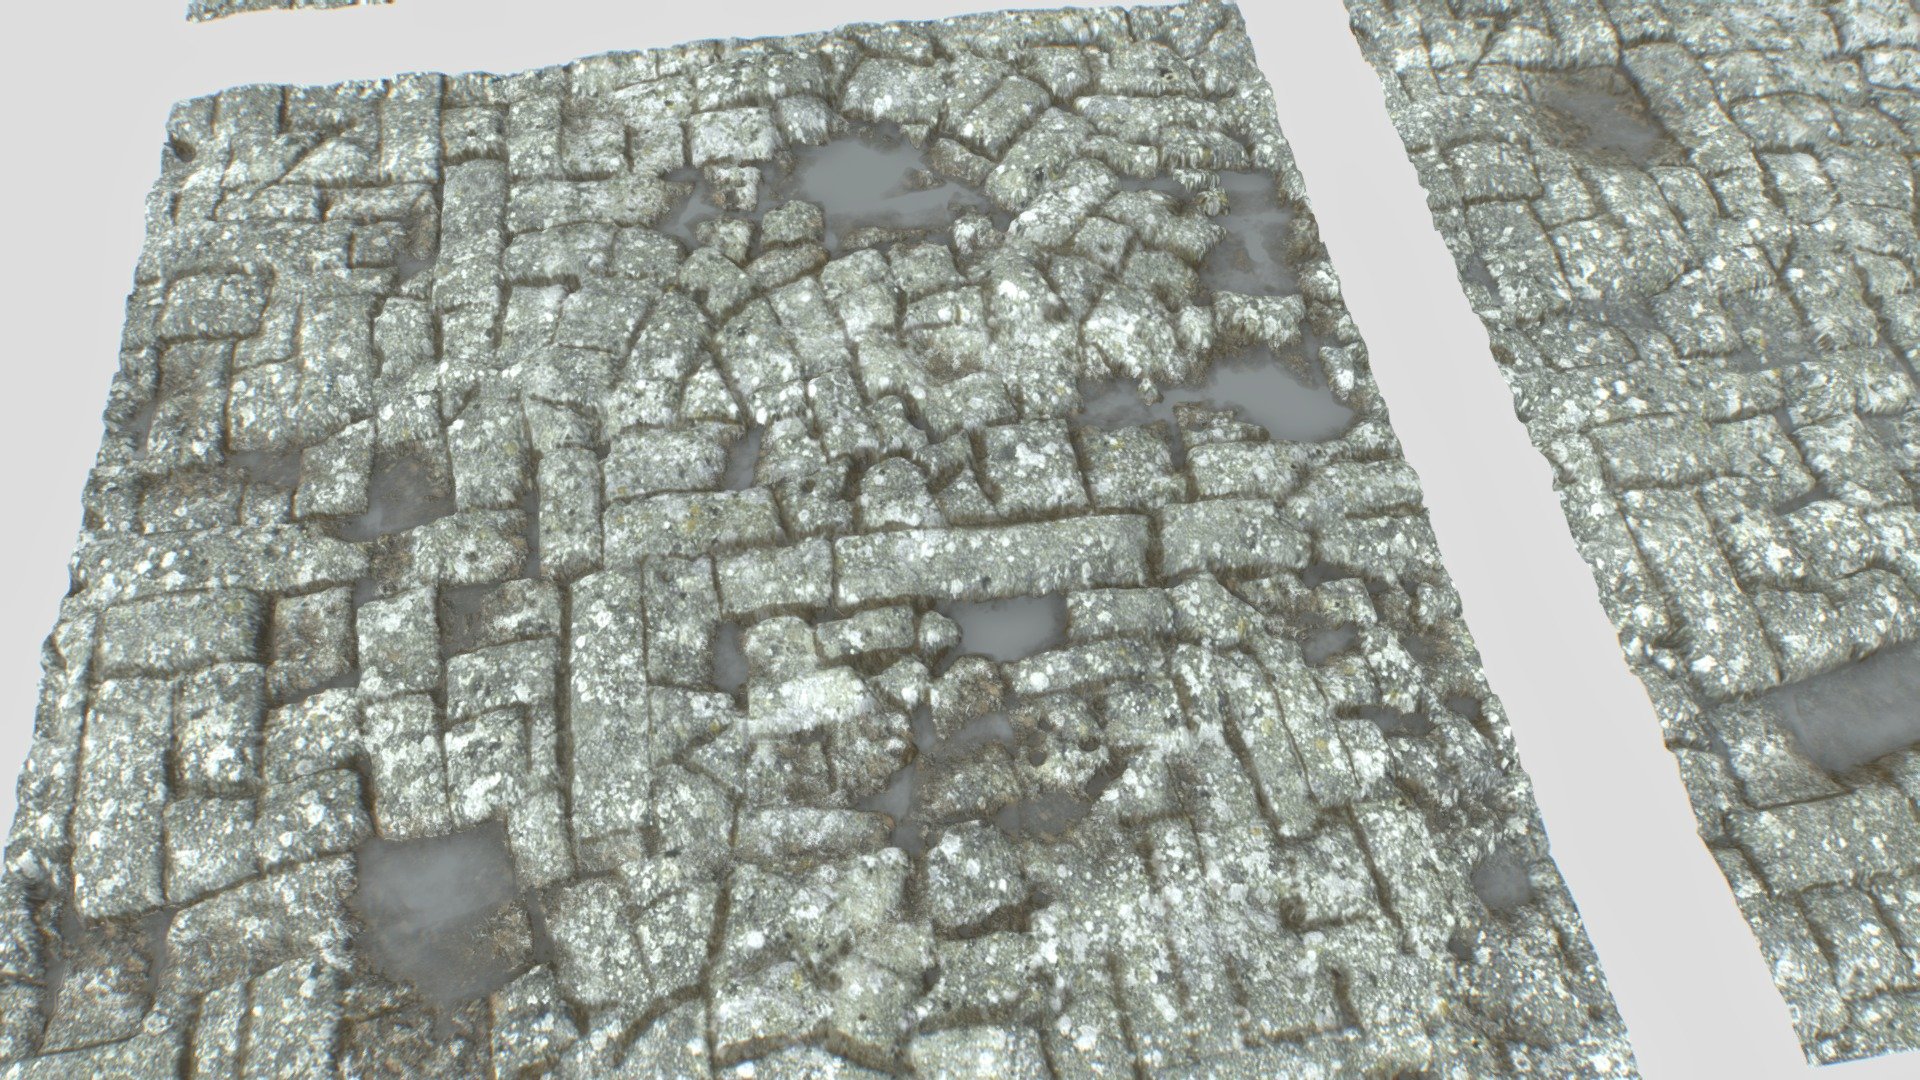 Old rock floor texture consisting in 4 texture sets containing:




1 set of normal

1 set of different floor with dirt/stones

2 sets of different floors with puddles

All seamless and can be attached together

4096 texture size PNG

Each set comes with Albedo, AO, displacement, normal, metalness, roughness - Old Floor Seamless 2 PBR Textures - Buy Royalty Free 3D model by 32cm 3d model